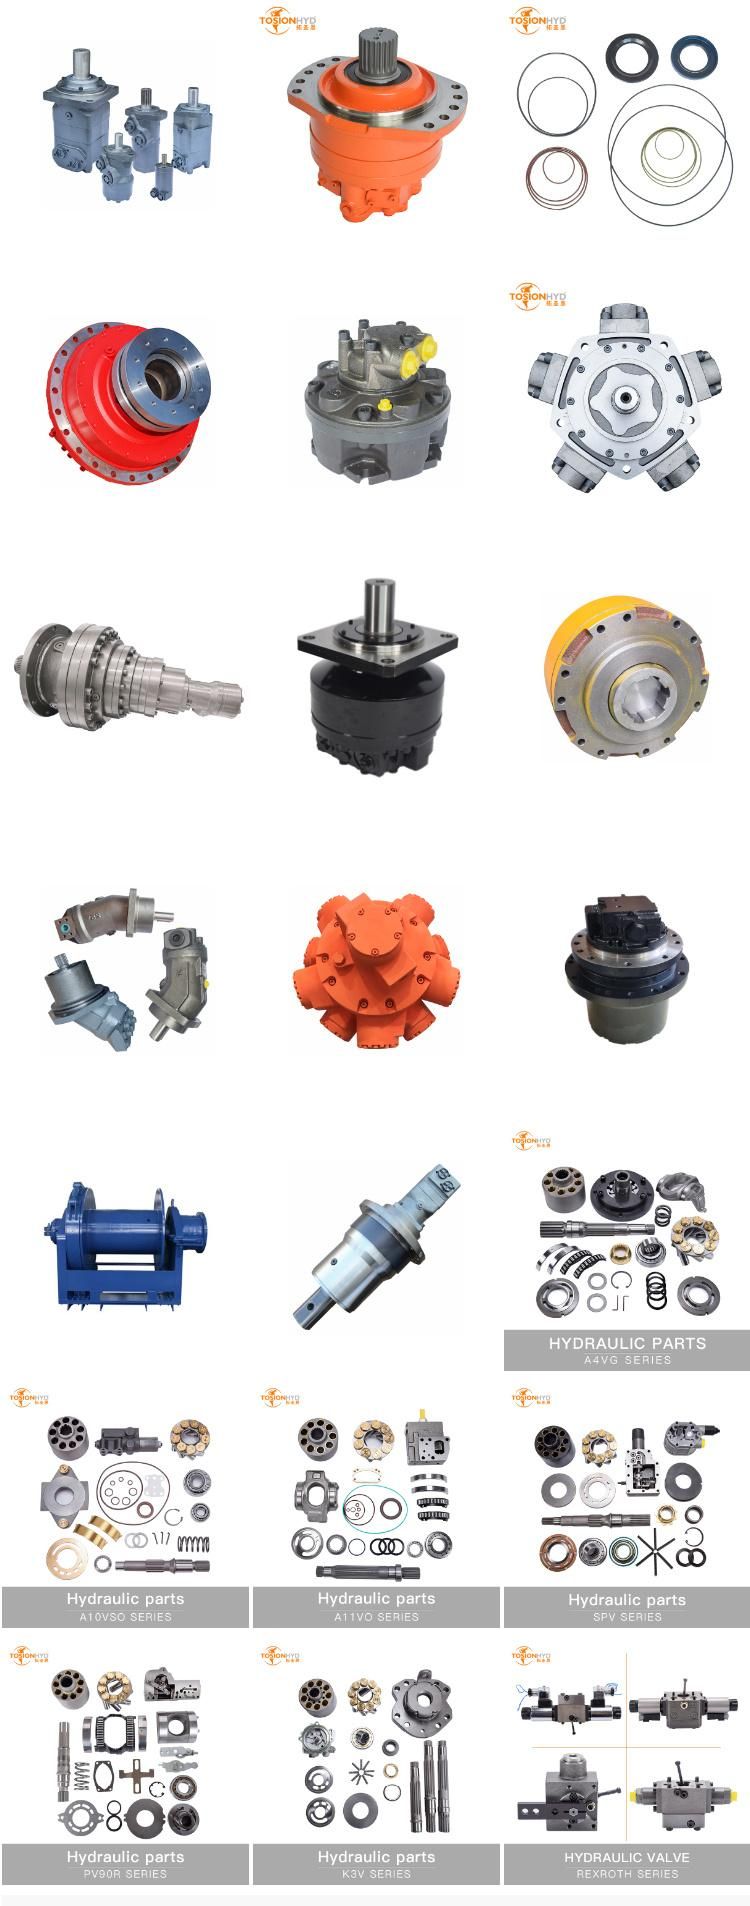 A7vo500 Hydraulic Motor Parts with Rexroth Spare Repair Kits